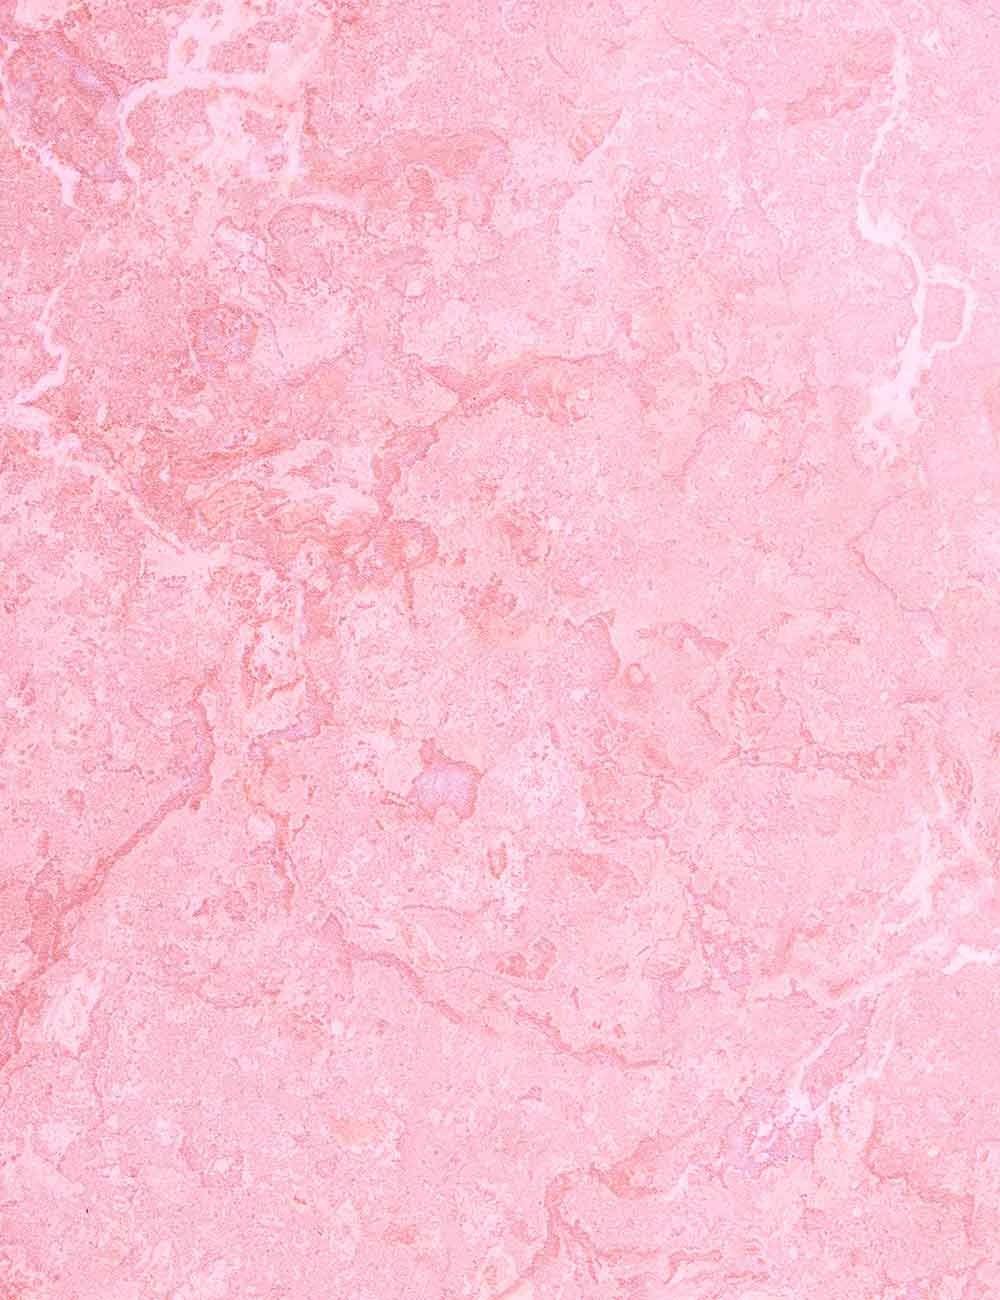 Pink Marble Texture Backdrop For Photography – Shopbackdrop